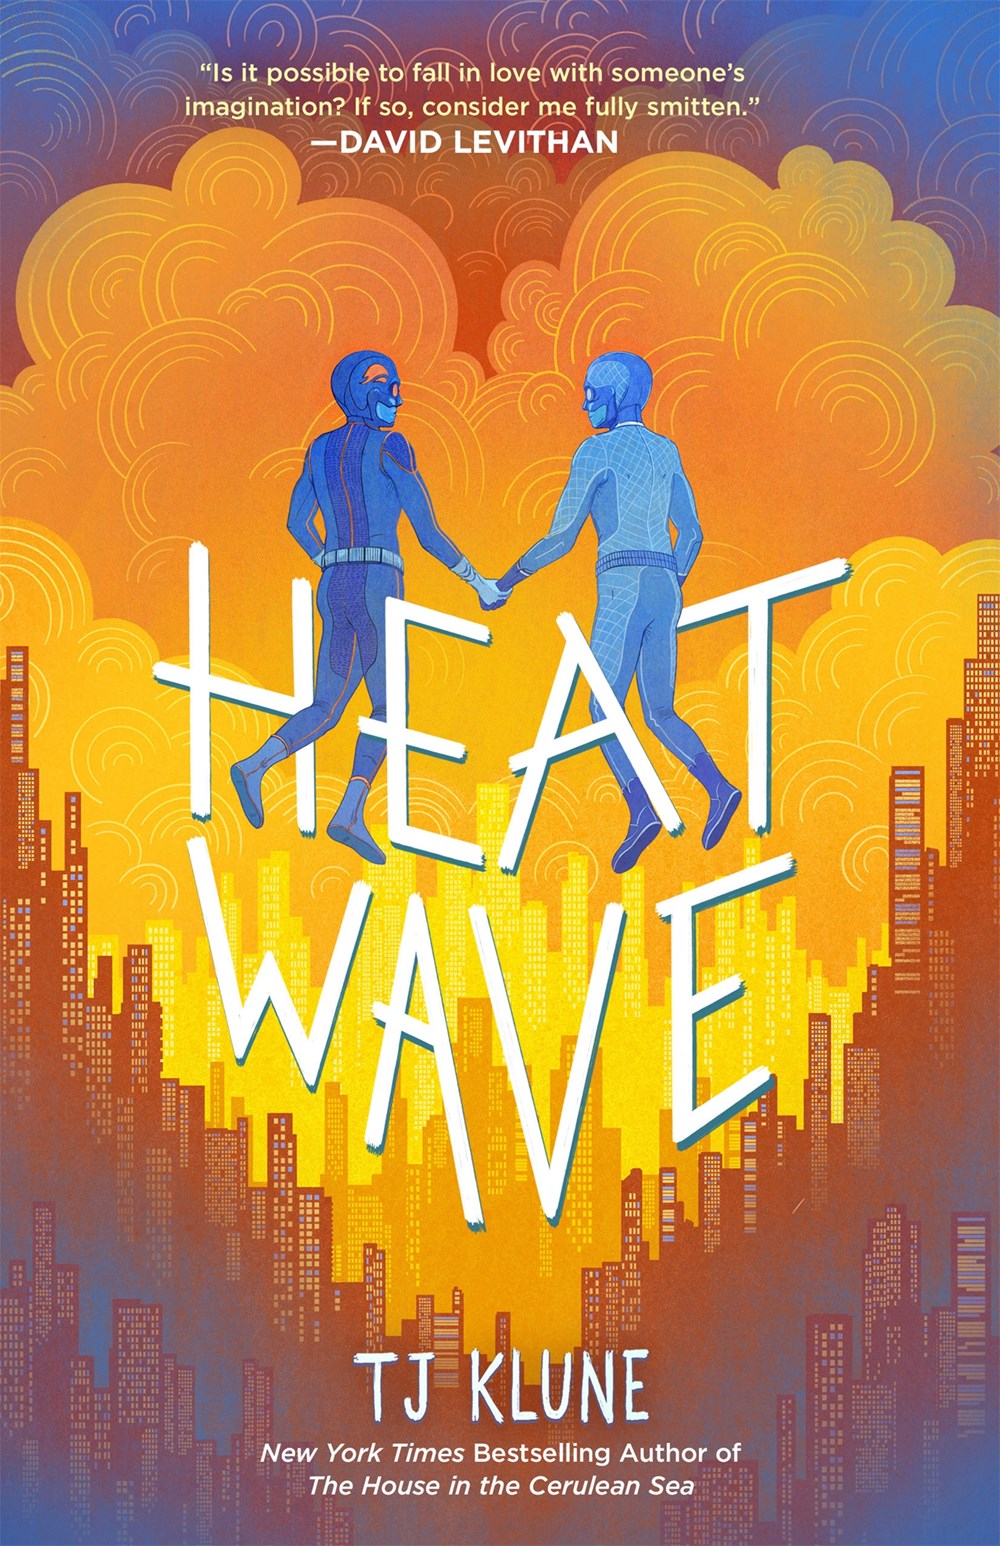 Heat wave cover